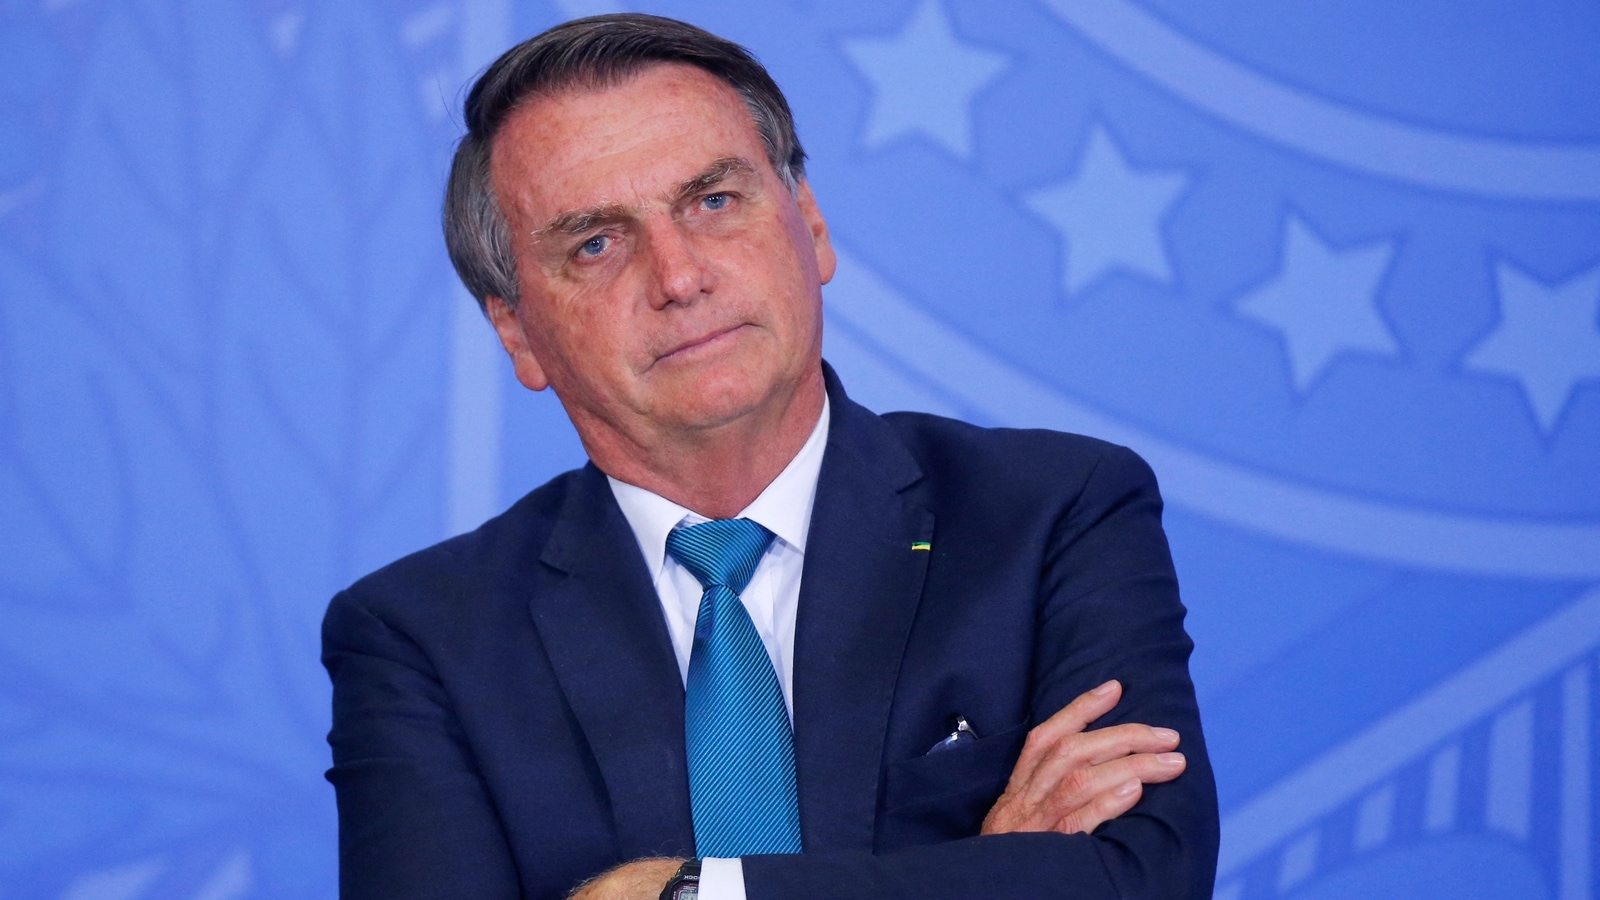 Jair Bolsonaro seeks to extend his stay in US by six months amid riot probe